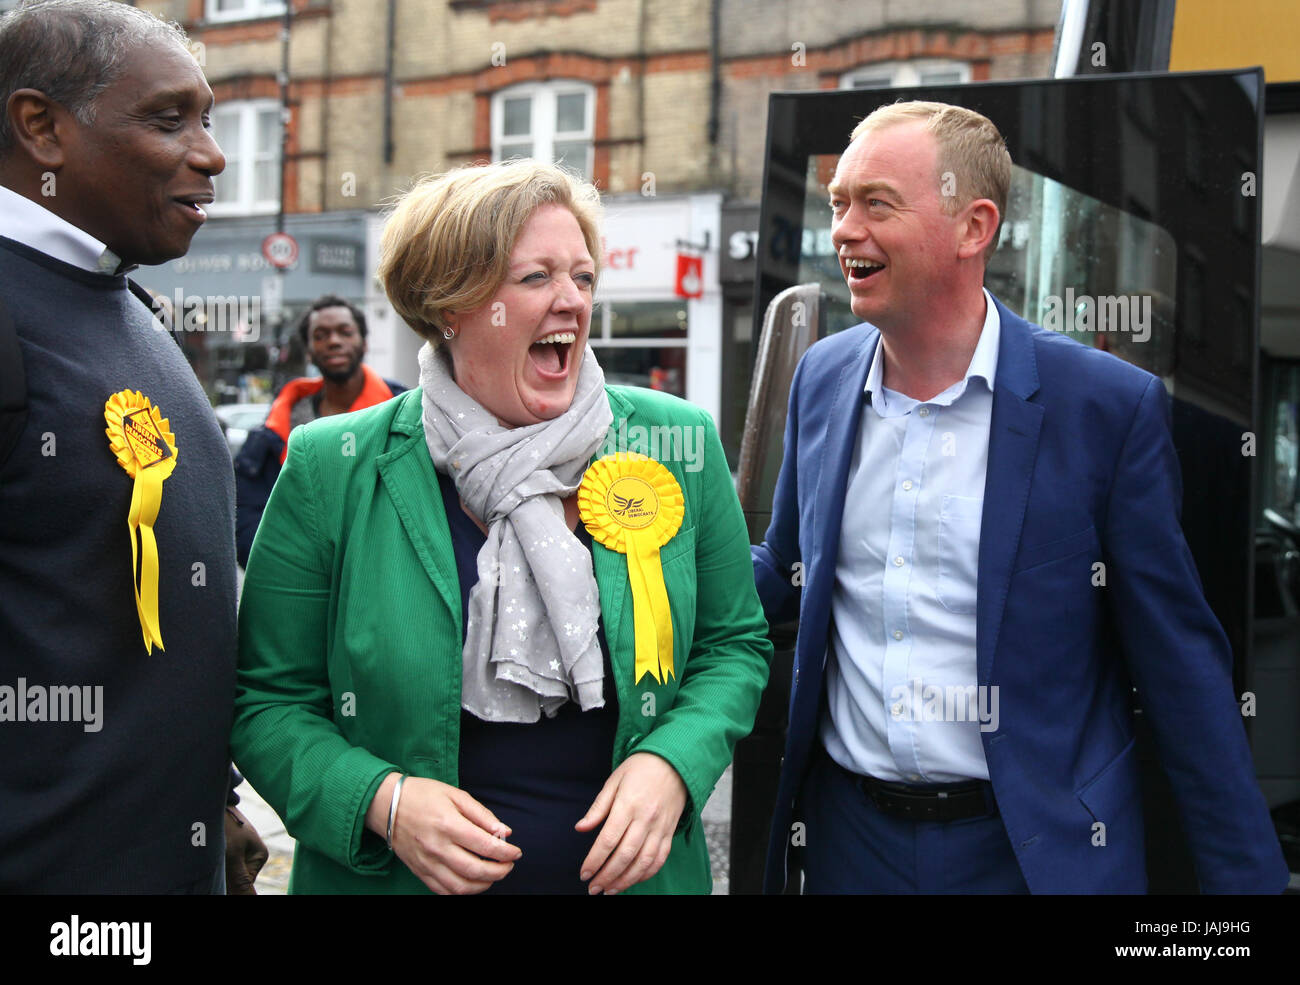 Tim Farron Leader of the Liberal Democrats, campaigns in Hornsey, North London with Lib Dem candidate Dawn Barnes. Seat currently held by Labour’s Catherine West MP.  Featuring: Brian Haley, Dawn Barnes, Tim Farron Where: London, United Kingdom When: 01 May 2017 Credit: Dinendra Haria/WENN.com Stock Photo